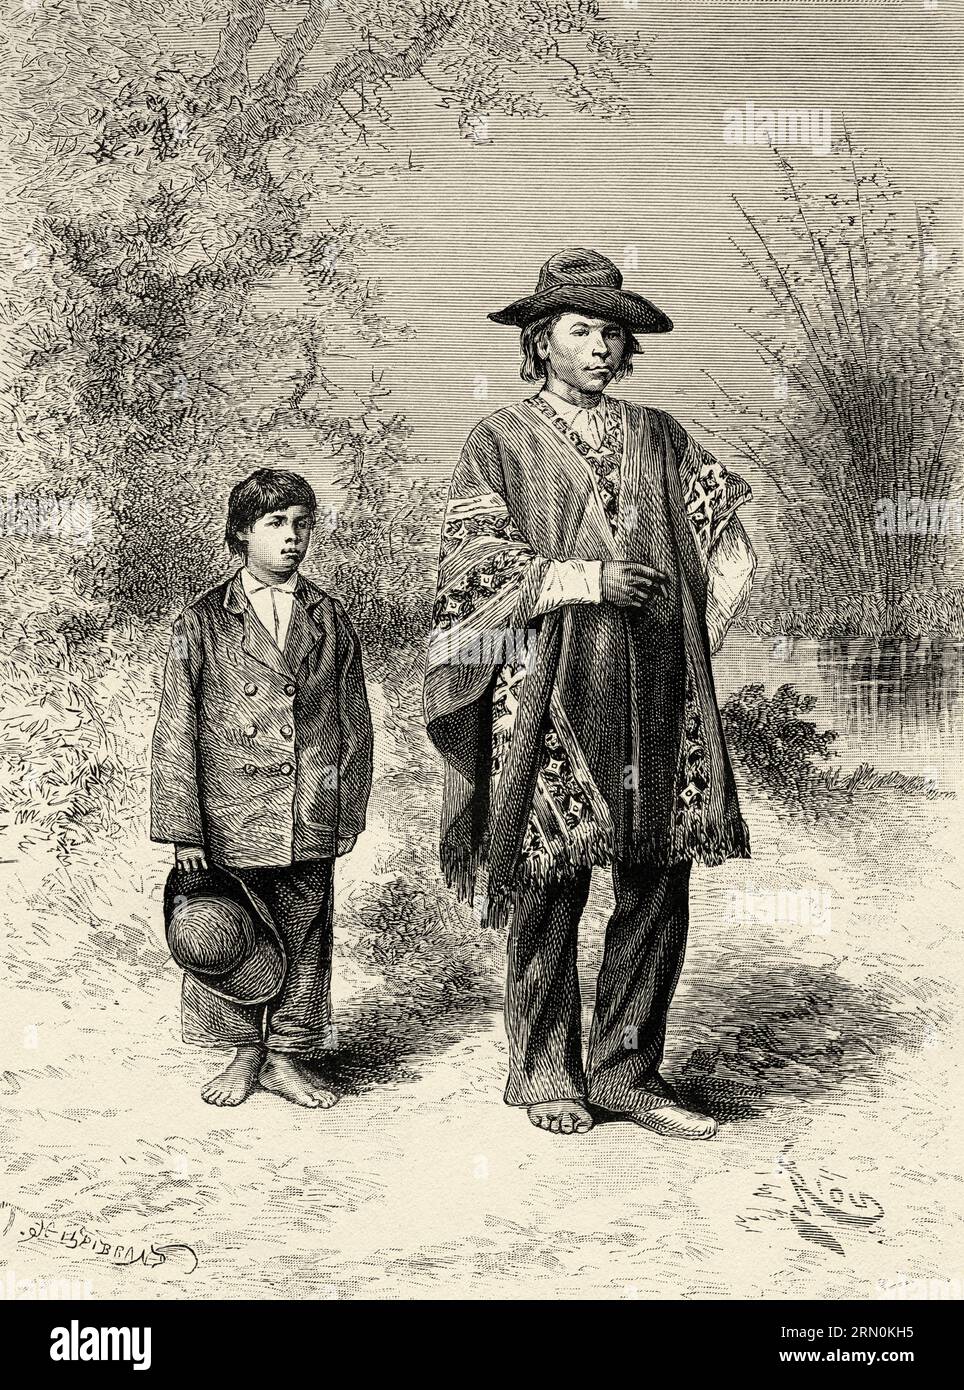 The jaguar hunter and his son, Bolivia, South America. Journey in search of the remains of the Crevaux mission by Émile-Arthur Thouar 1884. Old 19th century engraving from Le Tour du Monde 1906 Stock Photo